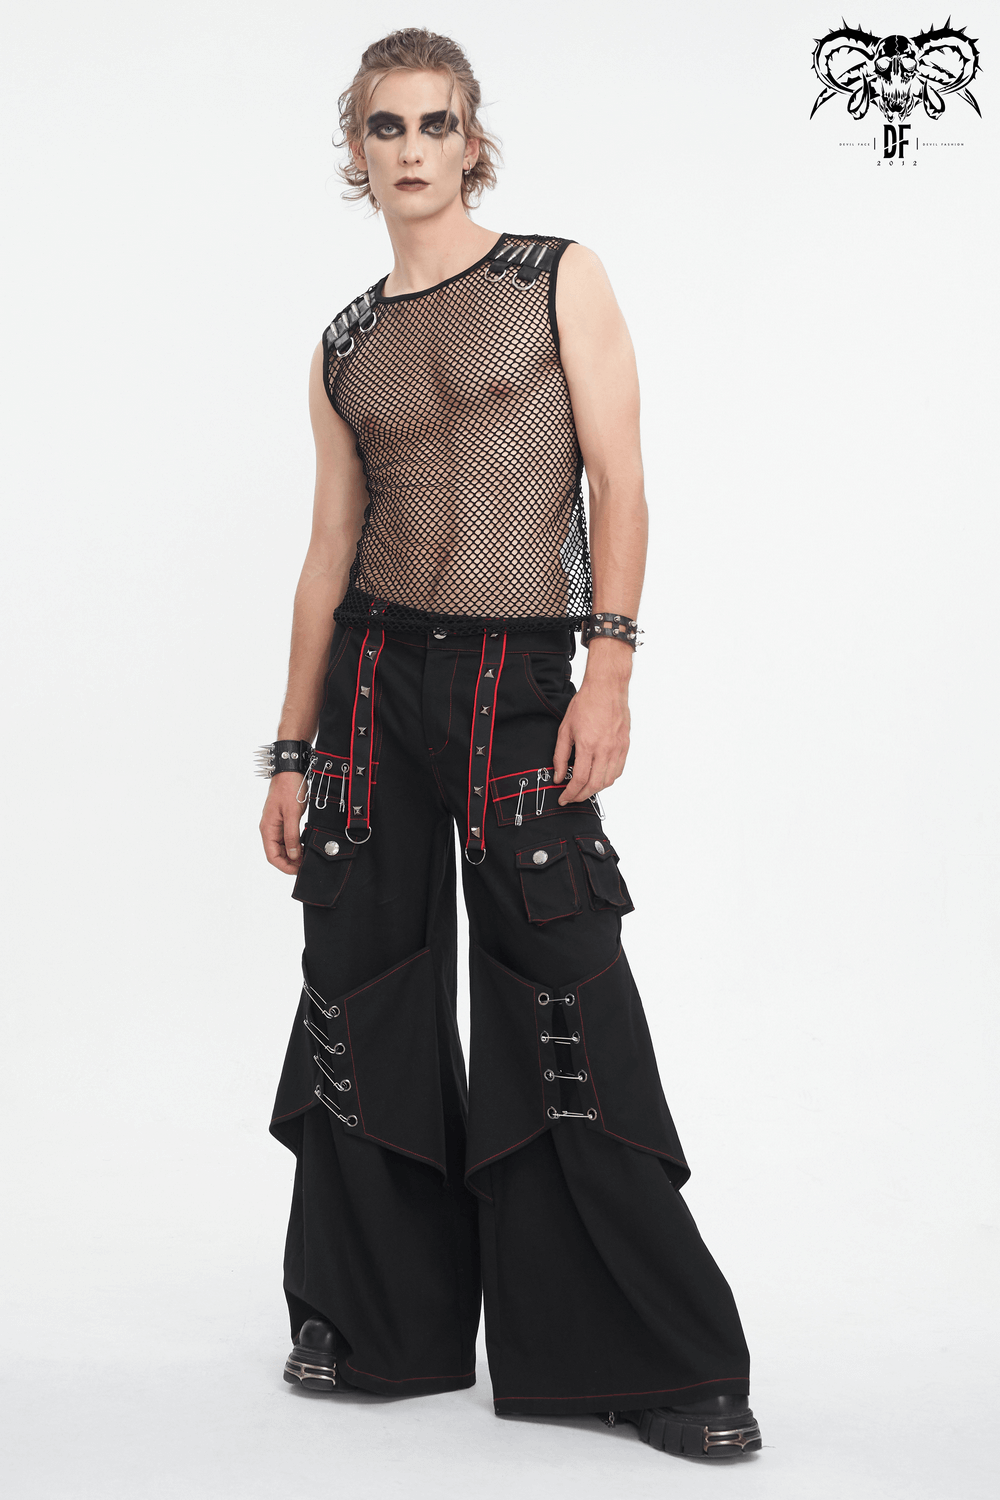 Gothic Black Pants with Red Stitch and Metal Accents